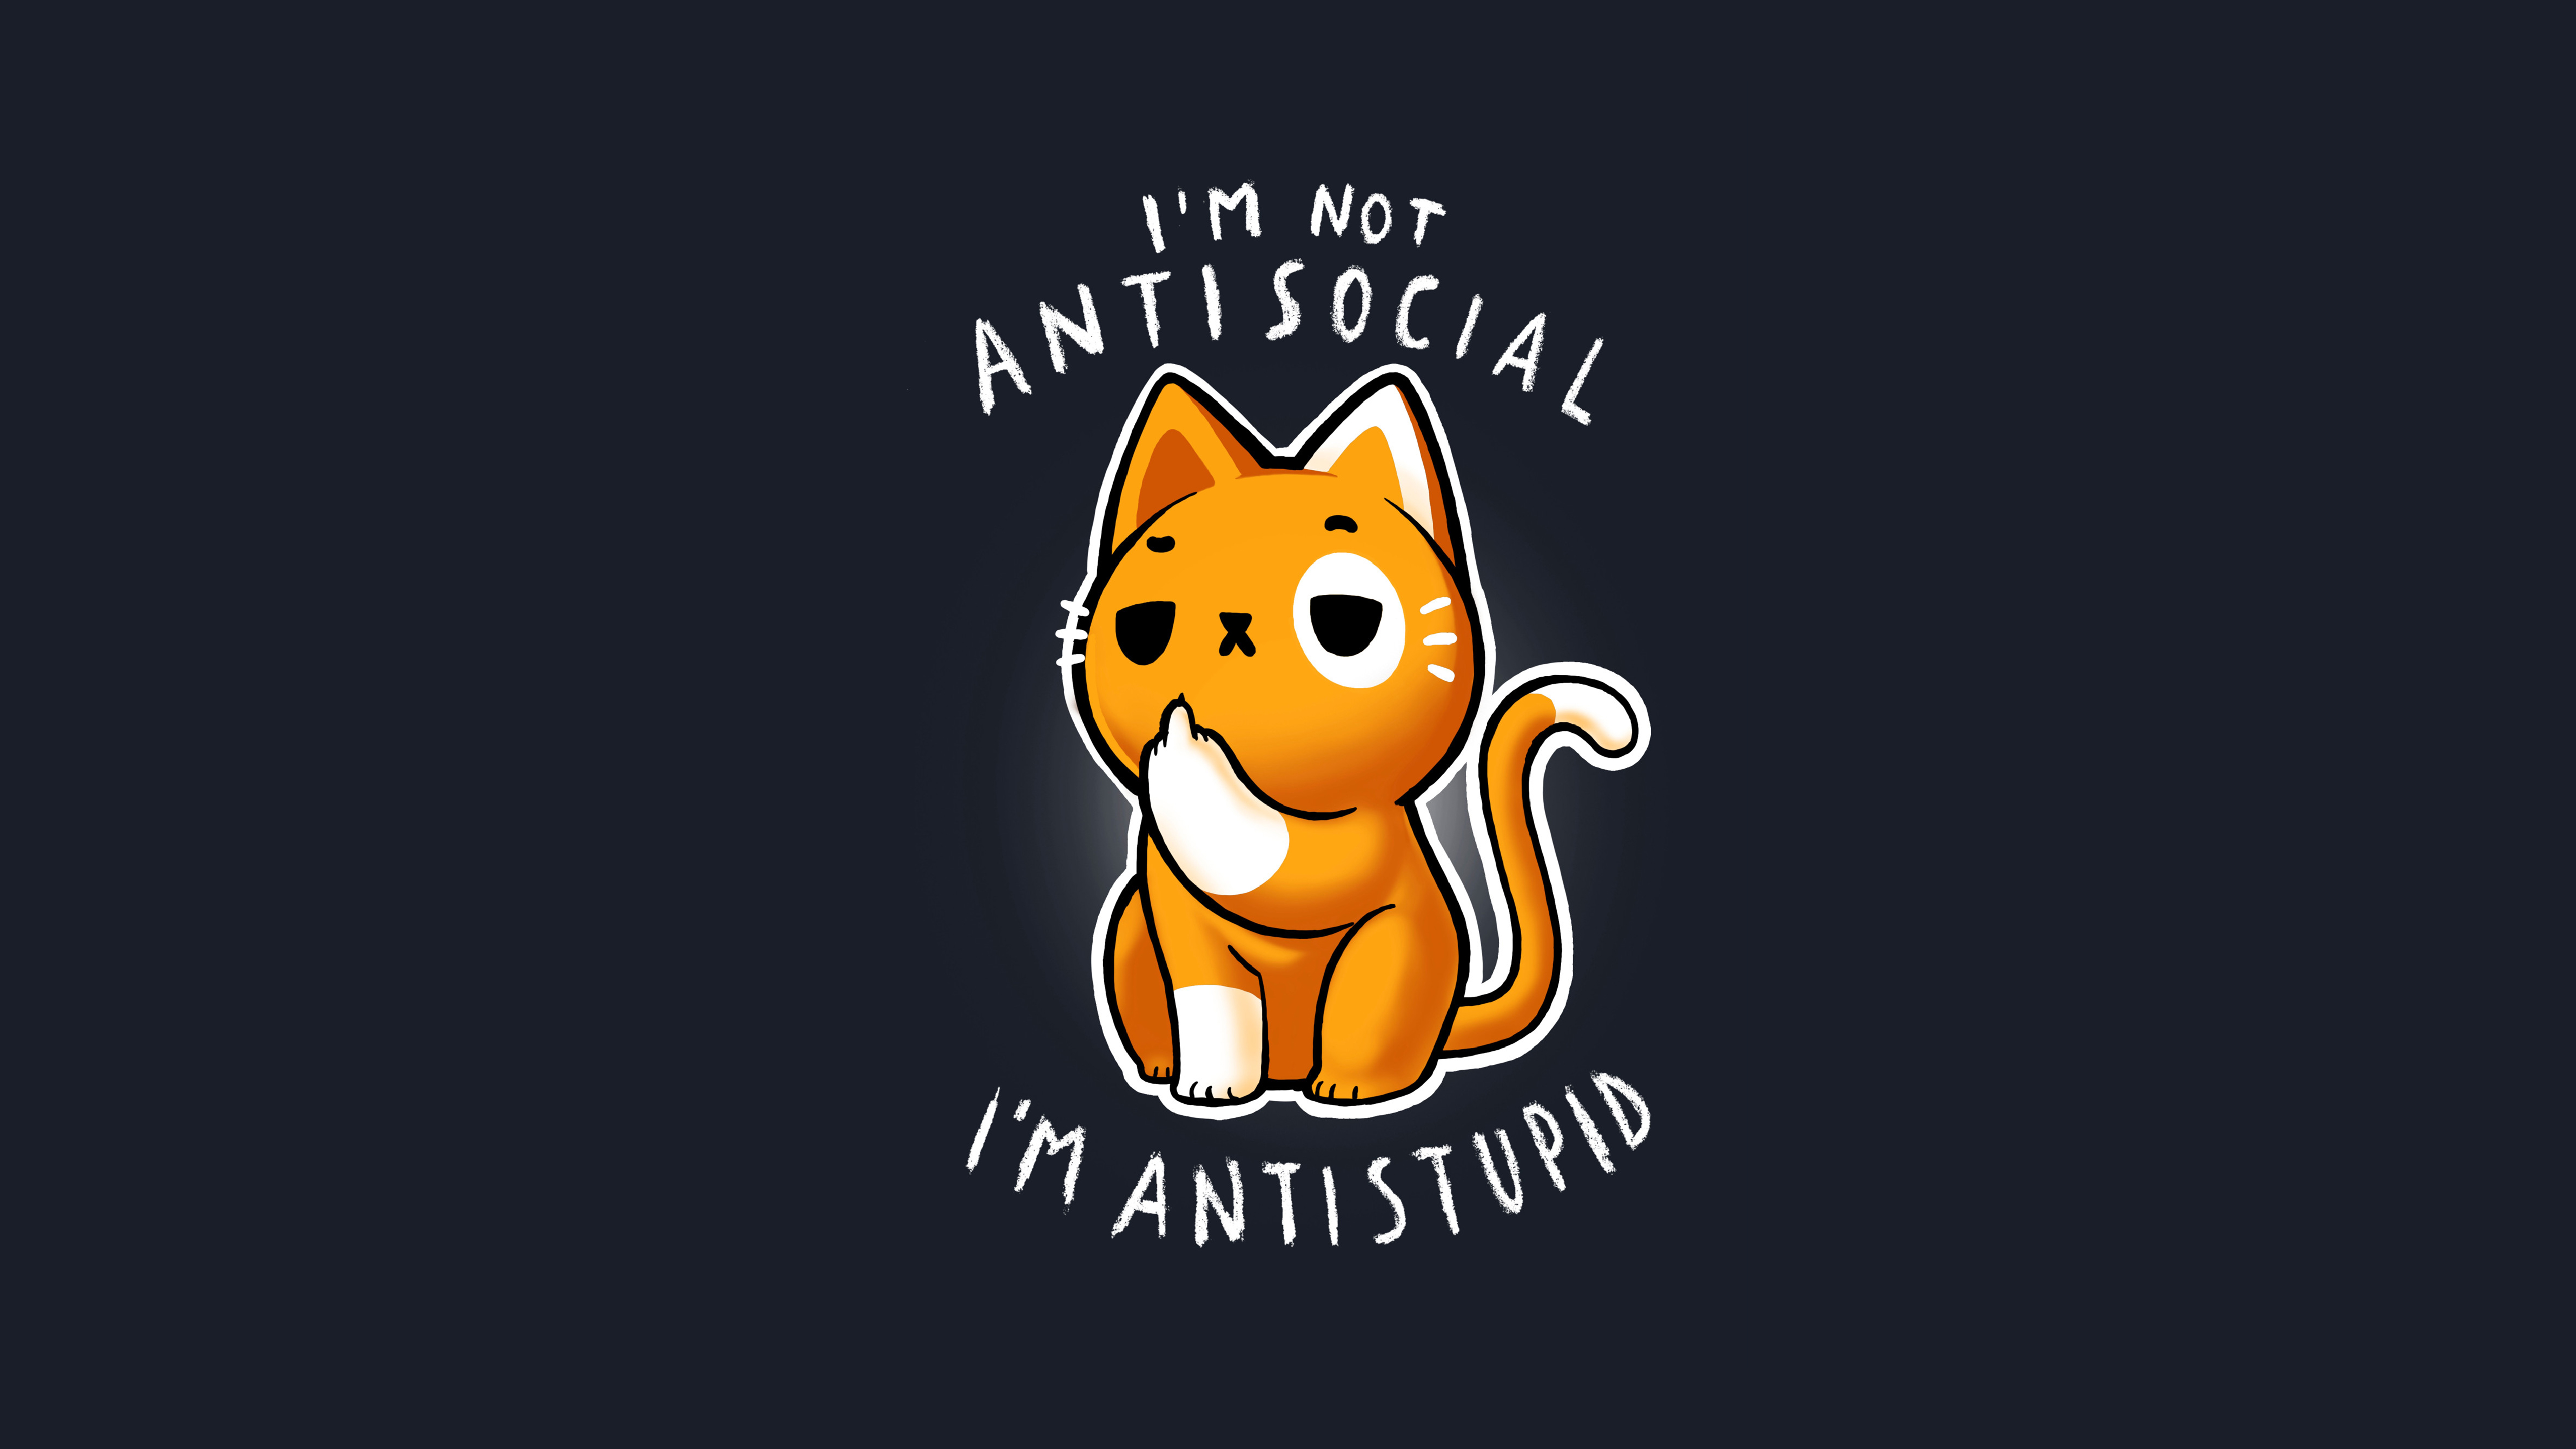 Anti social wallpaper by Wolftime107  Download on ZEDGE  260a